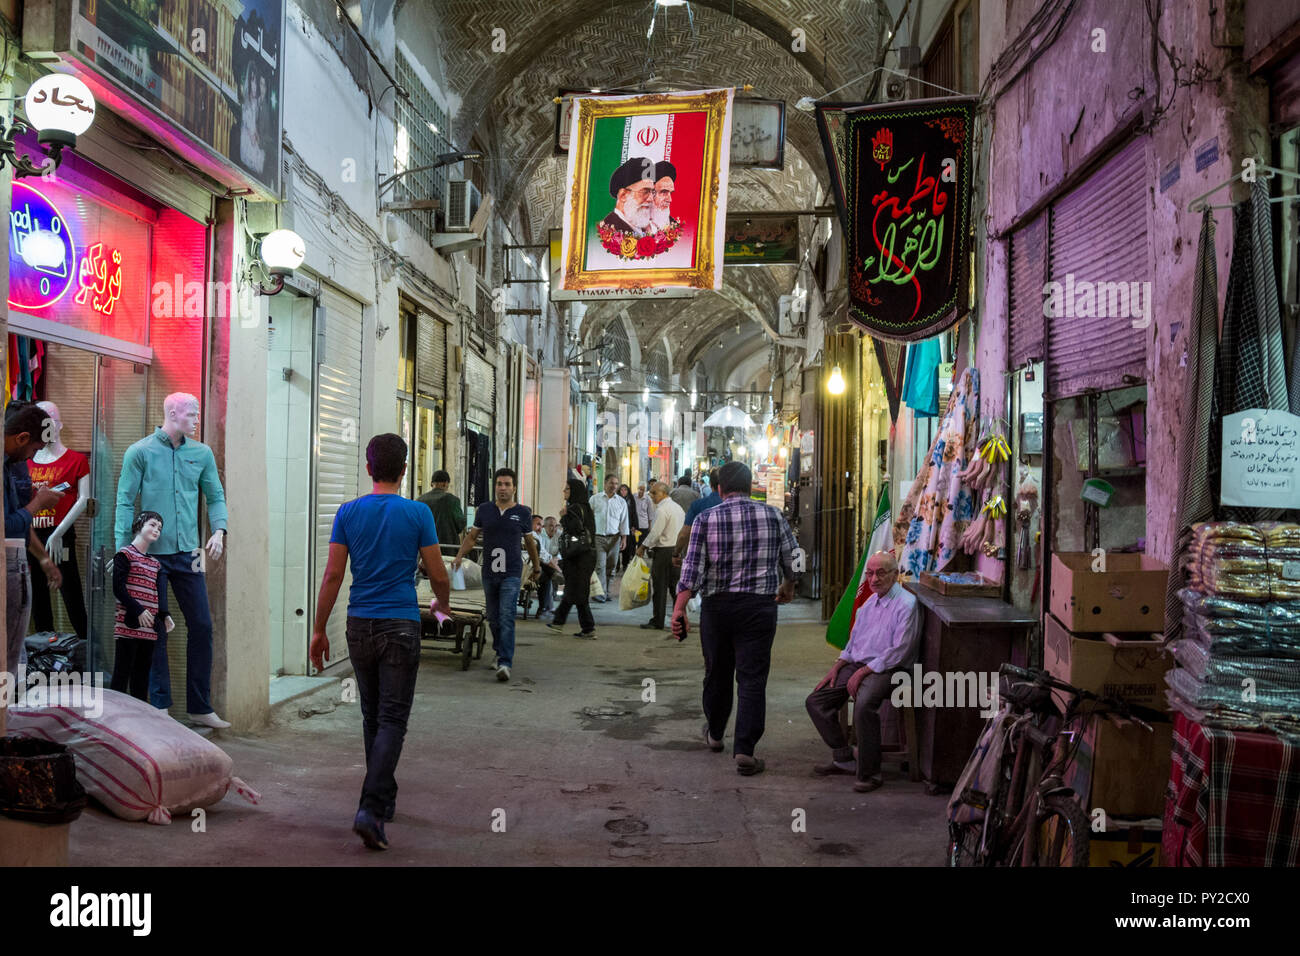 ISFAHAN, IRAN - AUGUST 20, 2018: Street of the Isfahan bazar with an Iranian flag hanging with the portraits of the 2 Supreme leaders of the Islamic R Stock Photo